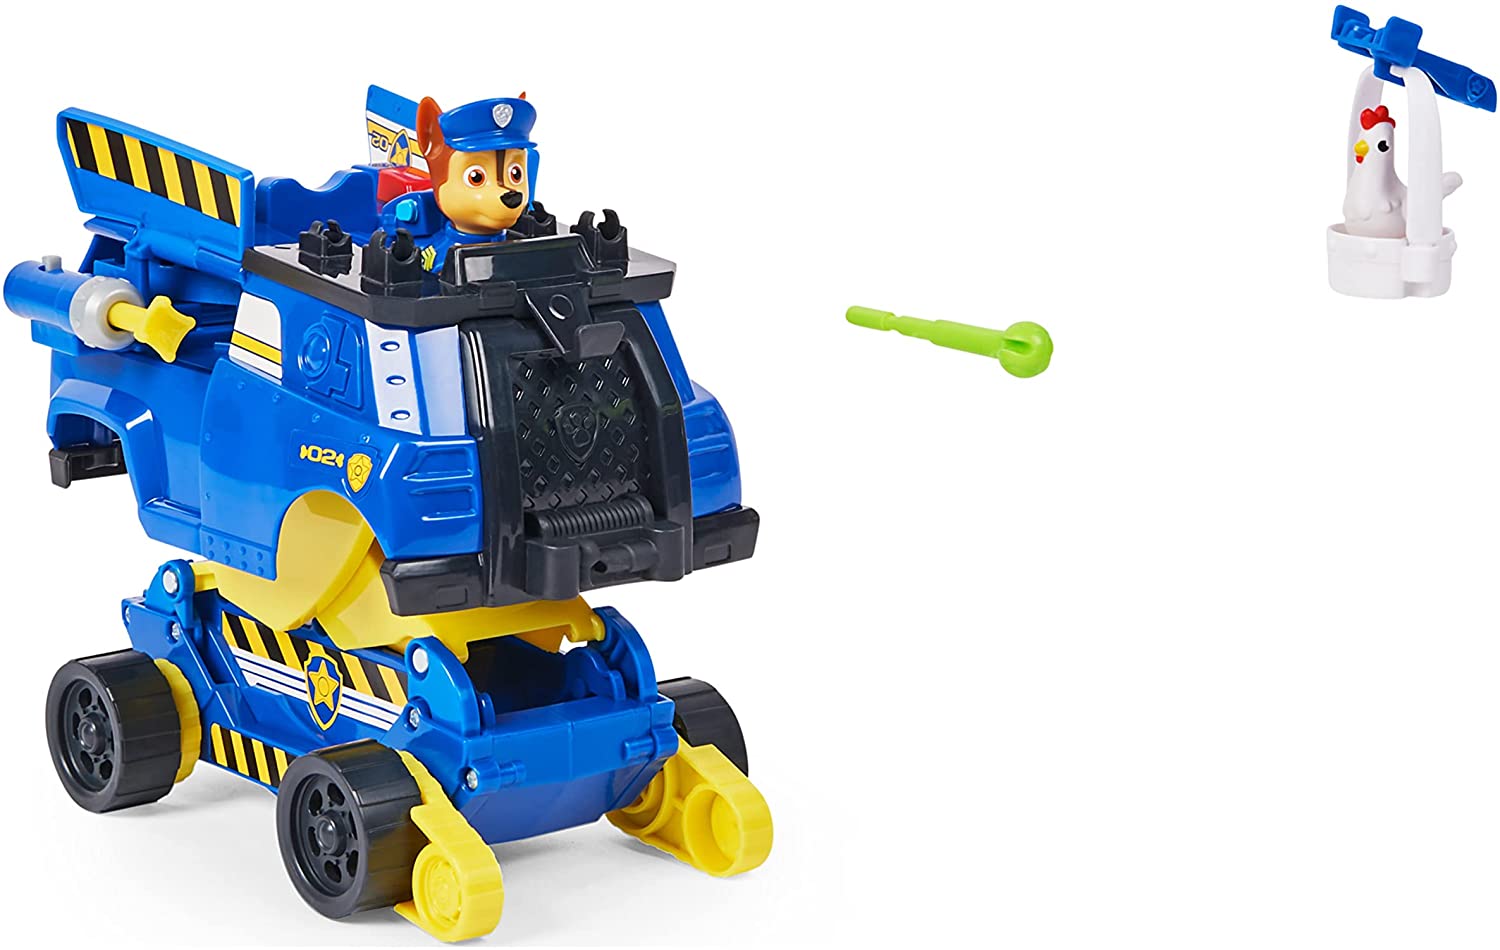 Paw Patrol Rise & Rescue Chase